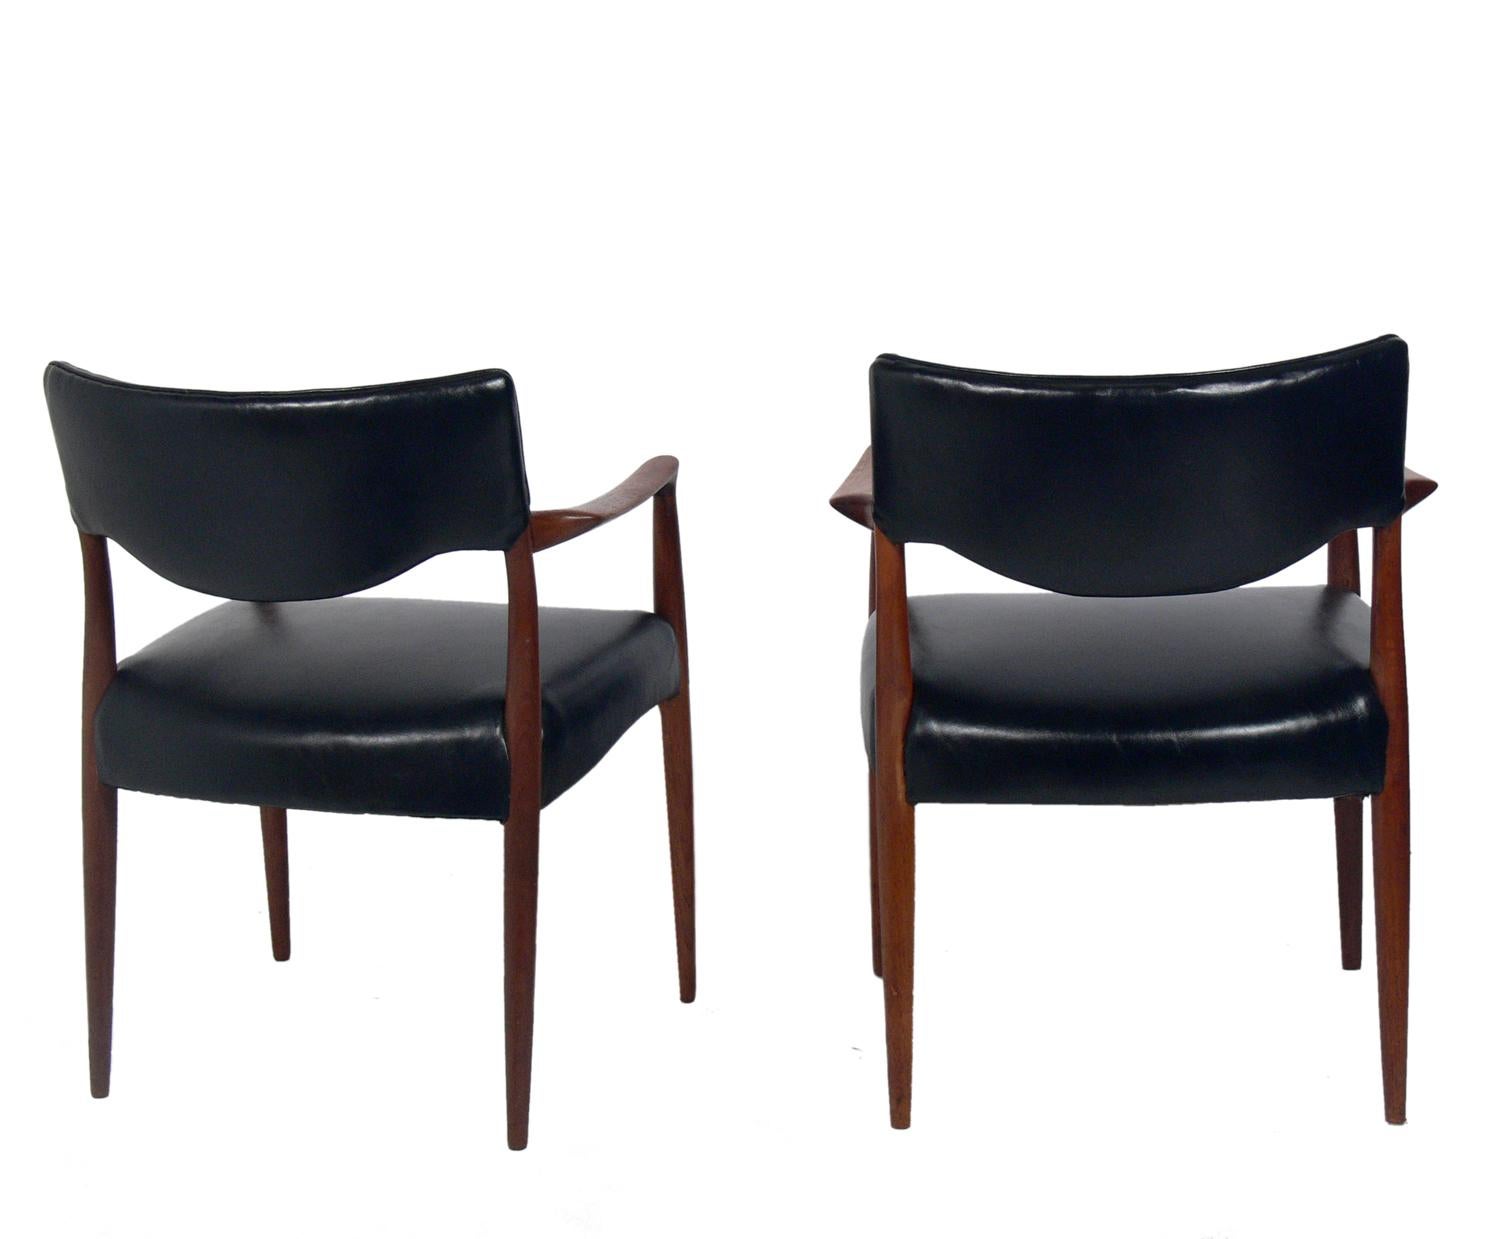 Pair of Danish Modern Chairs In Good Condition For Sale In Atlanta, GA